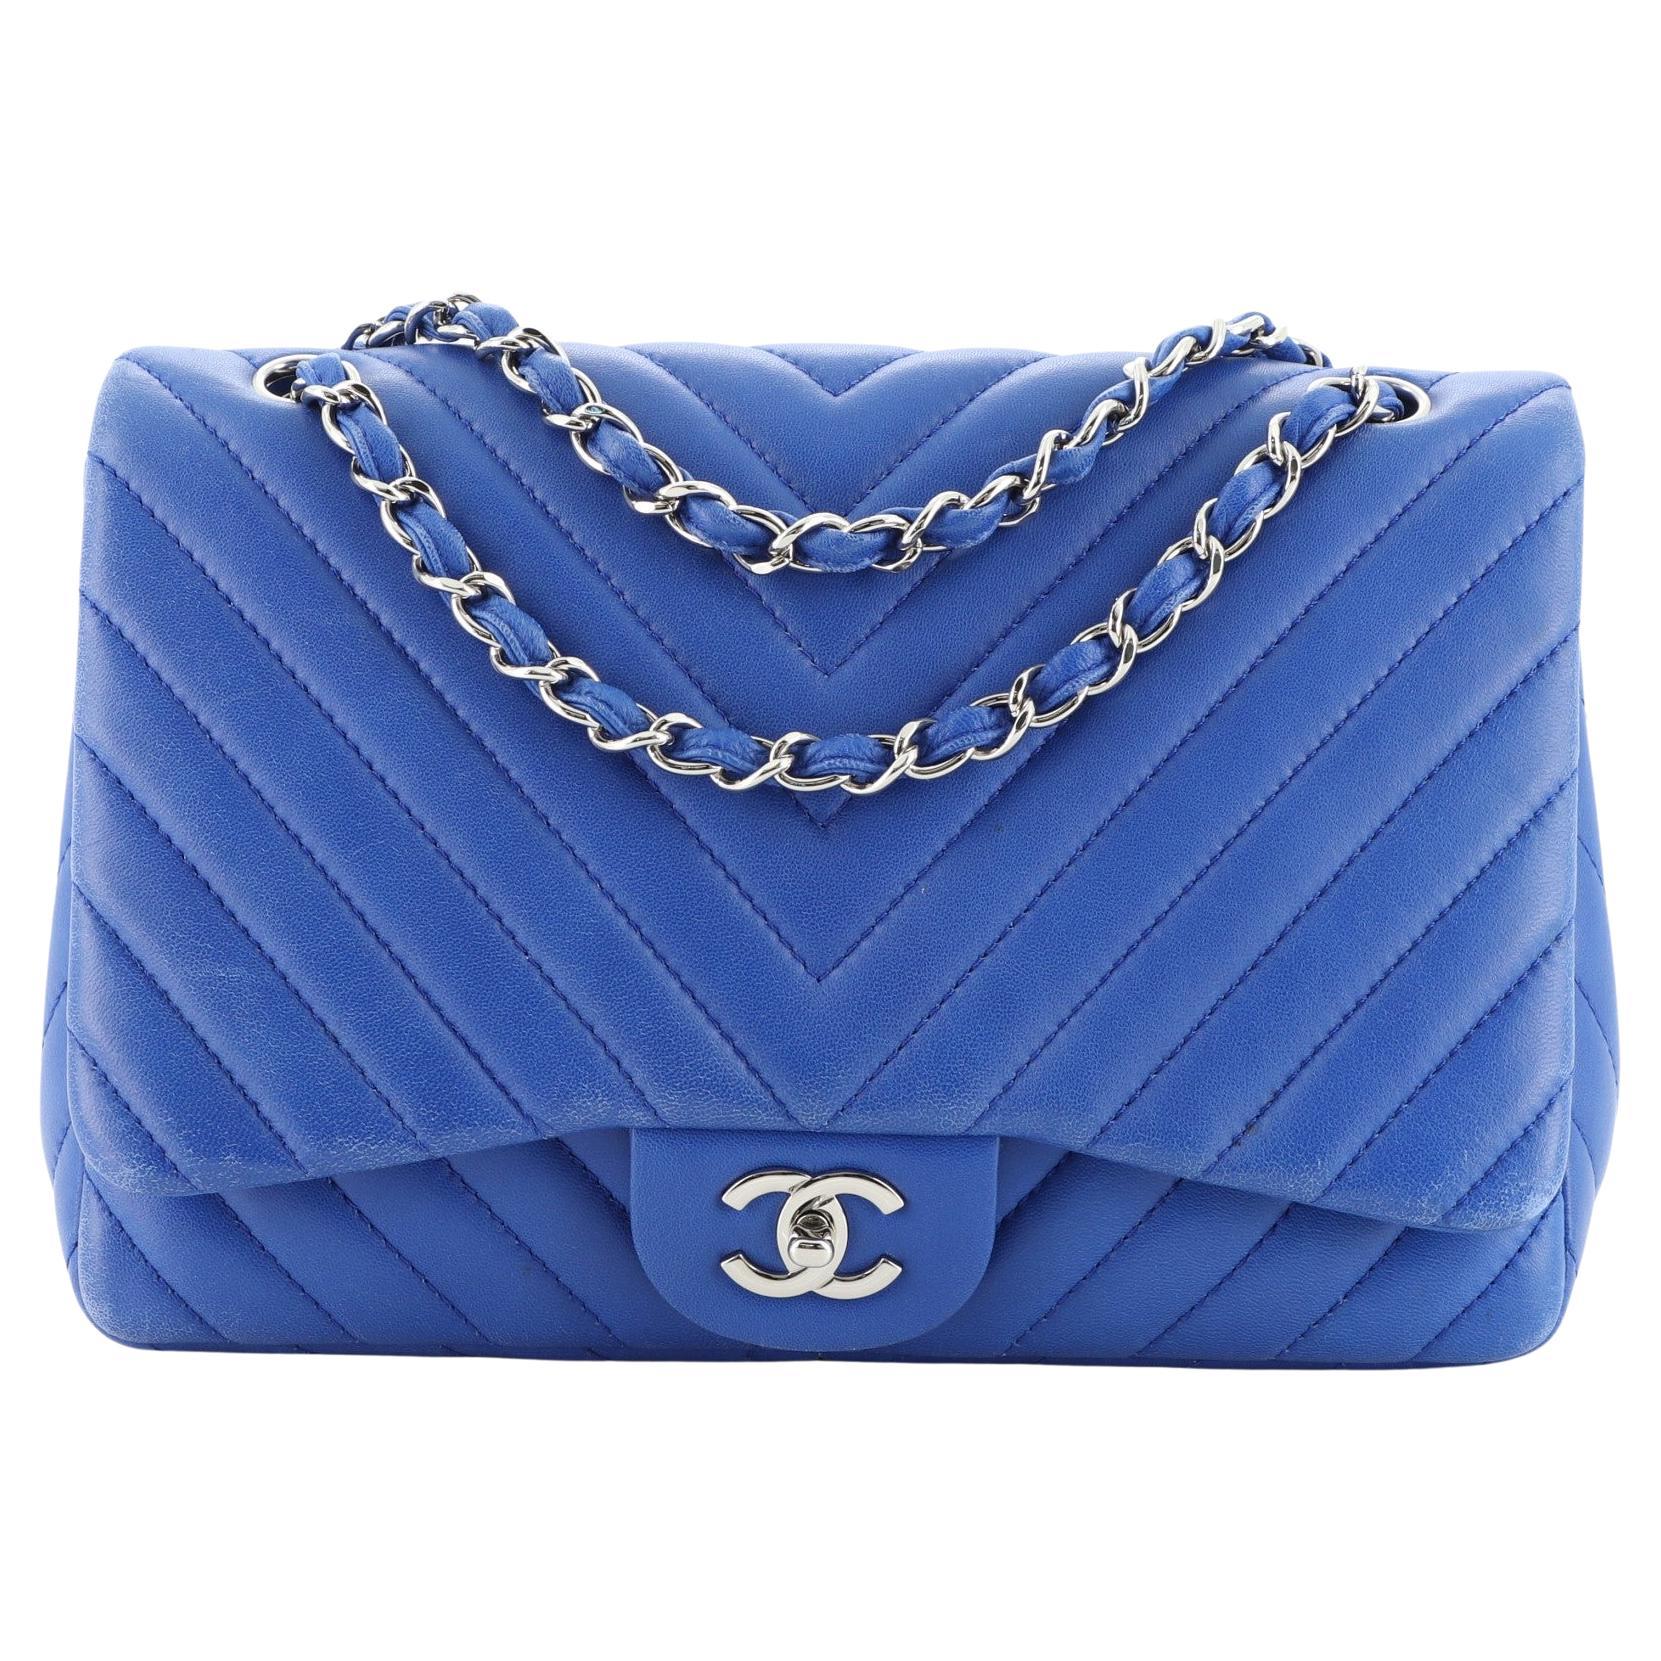 Chanel 14P Runway Turquoise Patent Crossbody Phone Case / Bag at ...